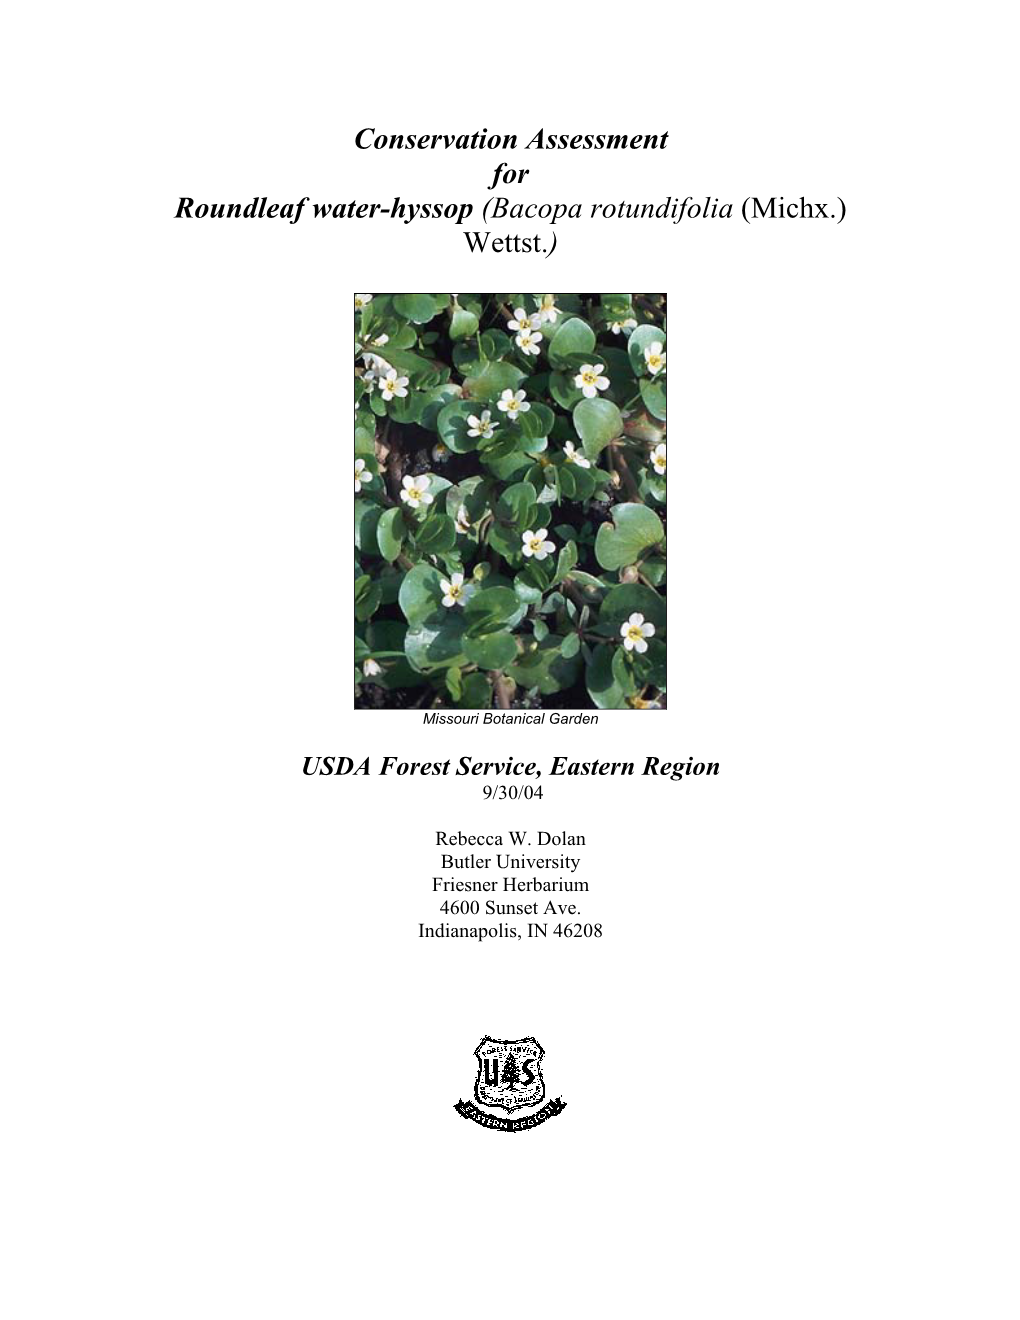 Conservation Assessment for Roundleaf Water-Hyssop (Bacopa Rotundifolia (Michx.) Wettst.)